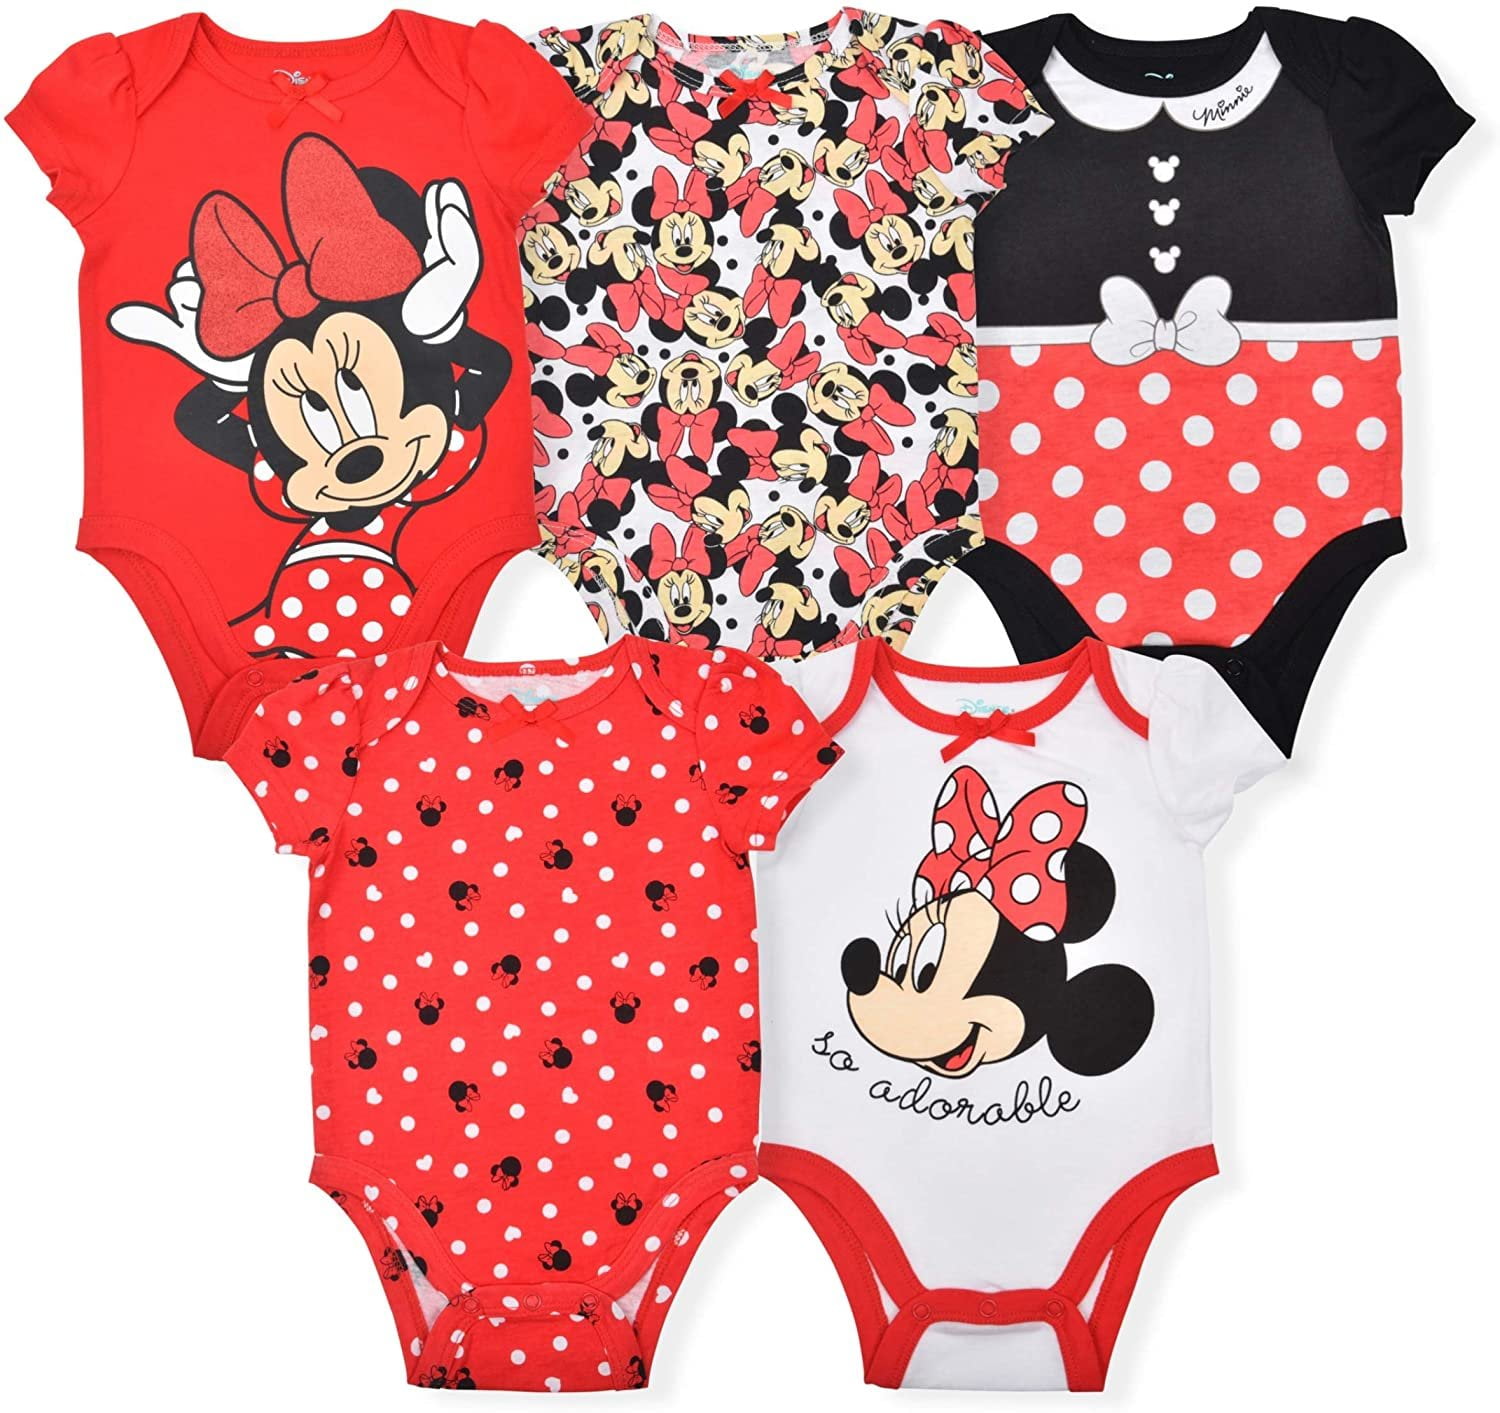 Disney Baby Mickey & Minnie Mouse 2 Pack Bodysuits 3 6 12 9 18 Months 